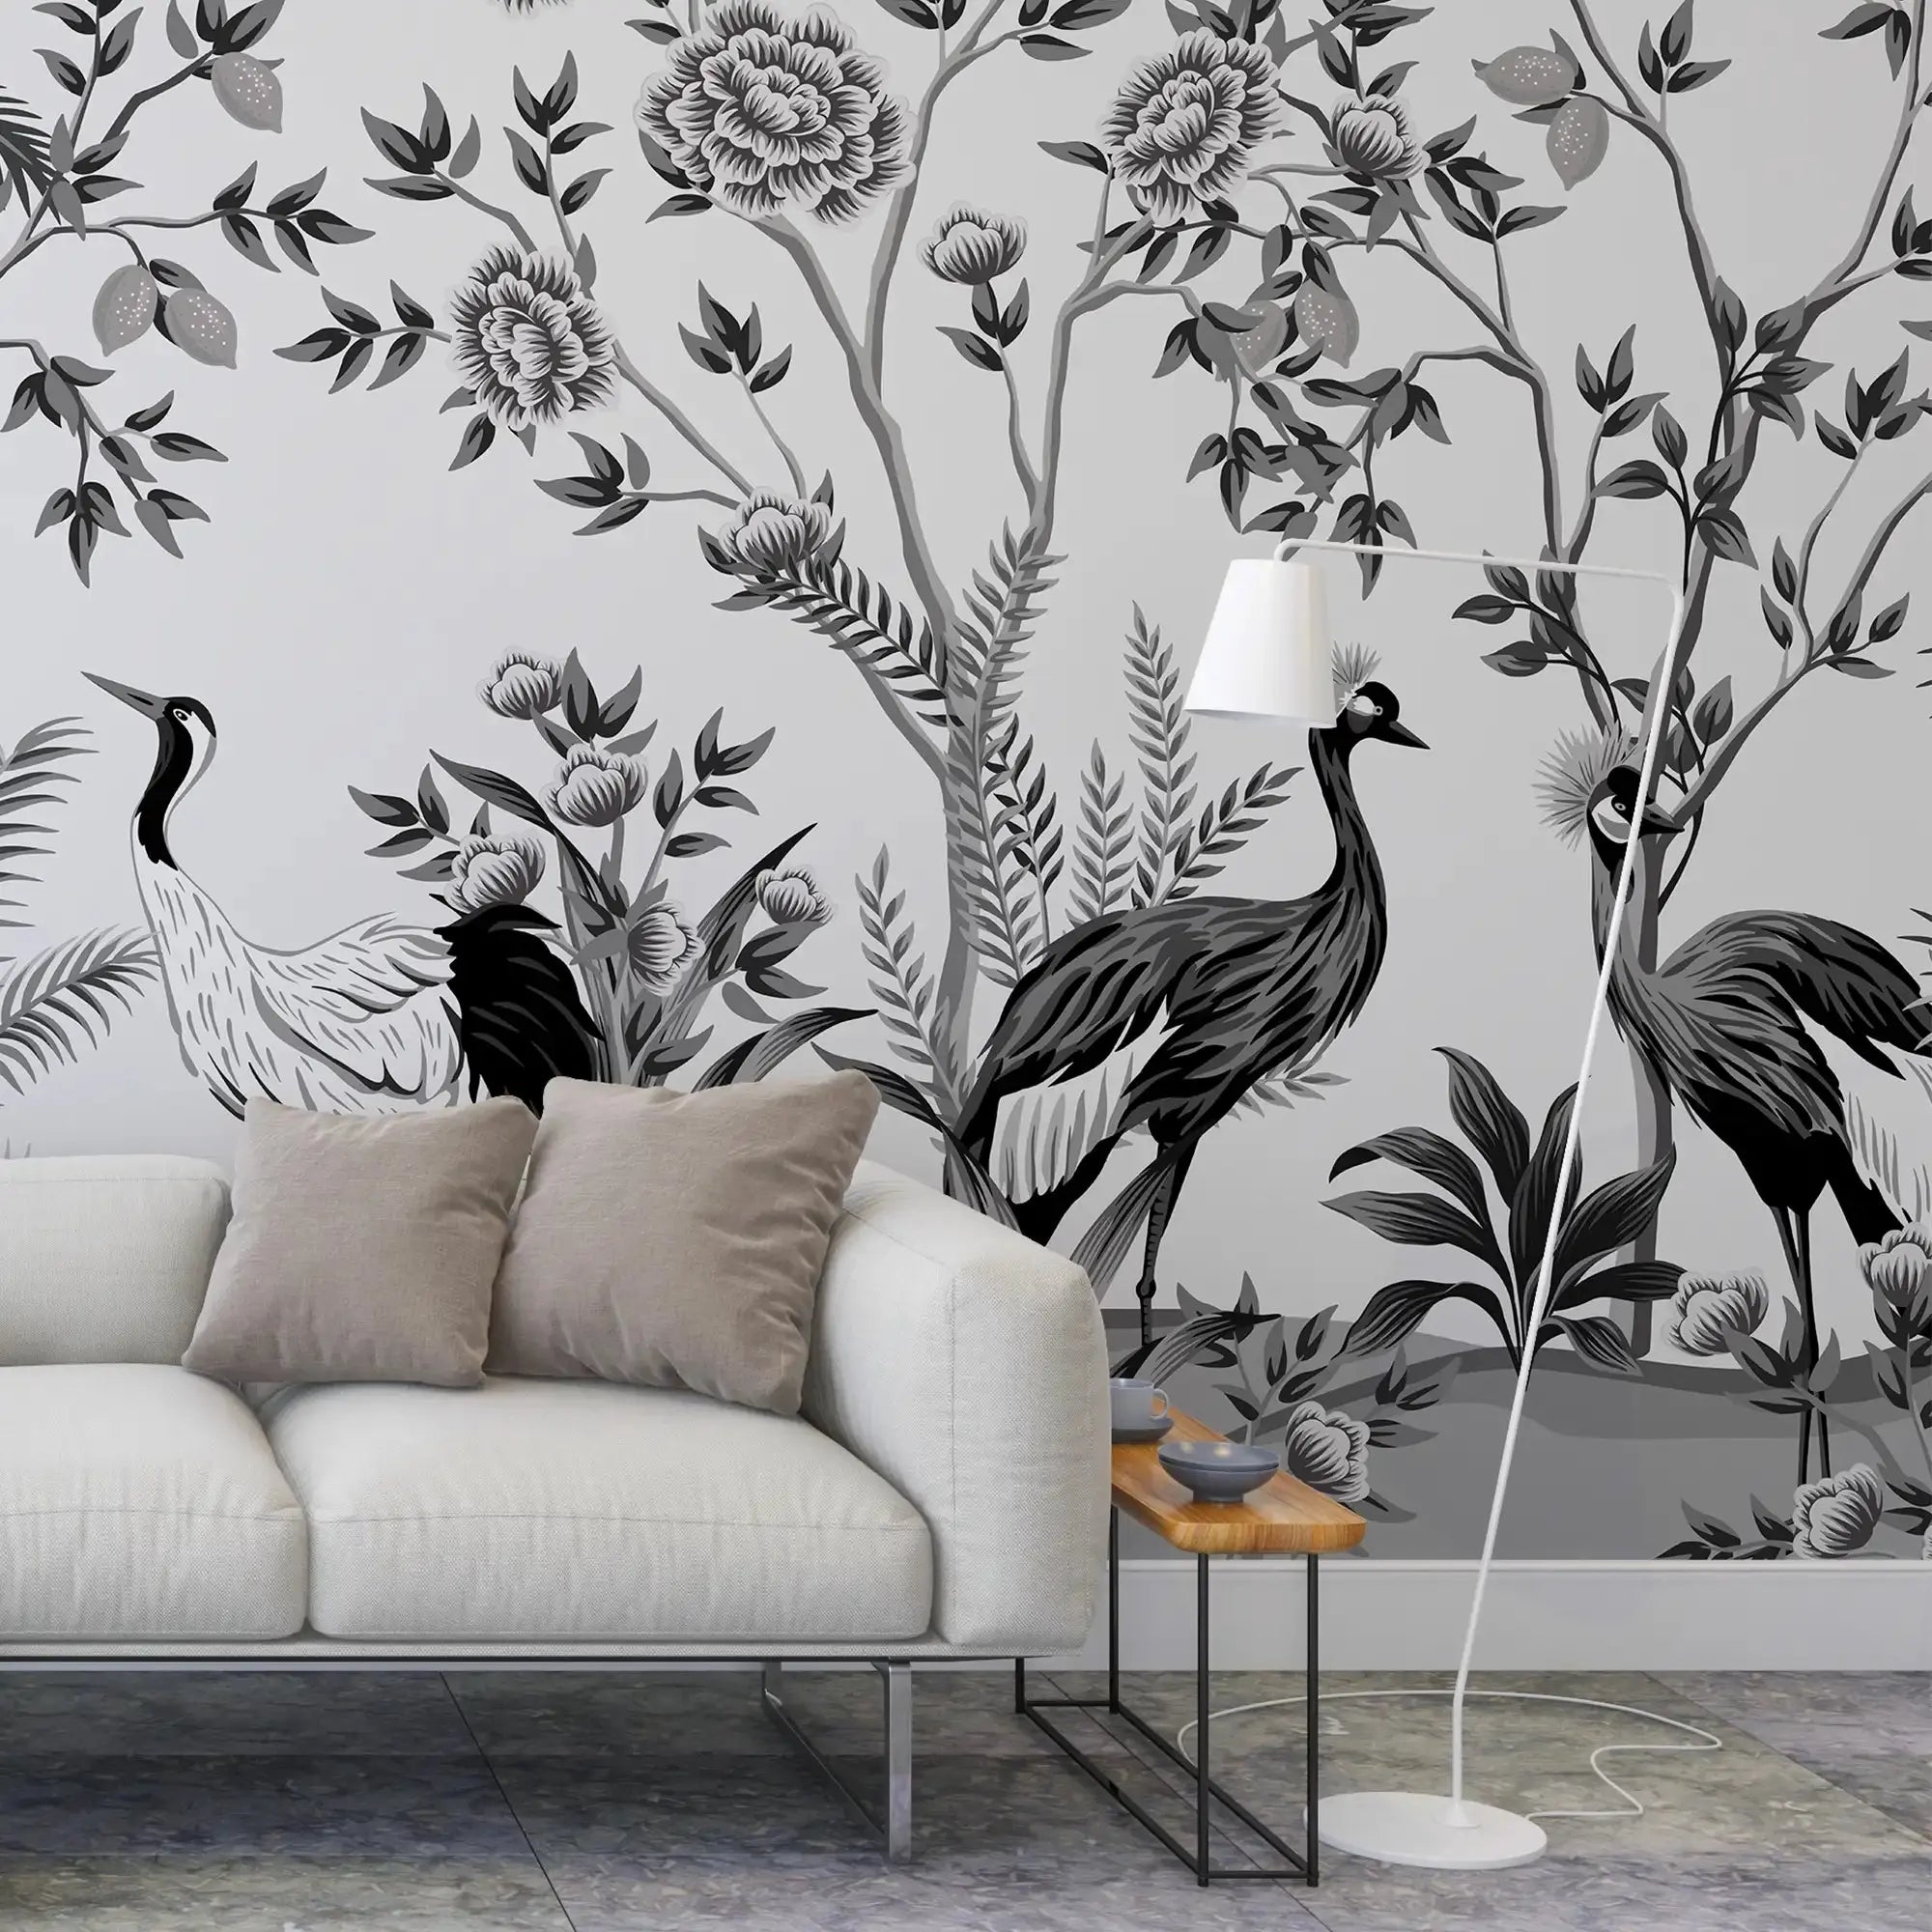 3107-E / Peelable Asian Wallpaper - Oriental Style with Cranes and Flowers - Easy Install Wall Mural - Artevella